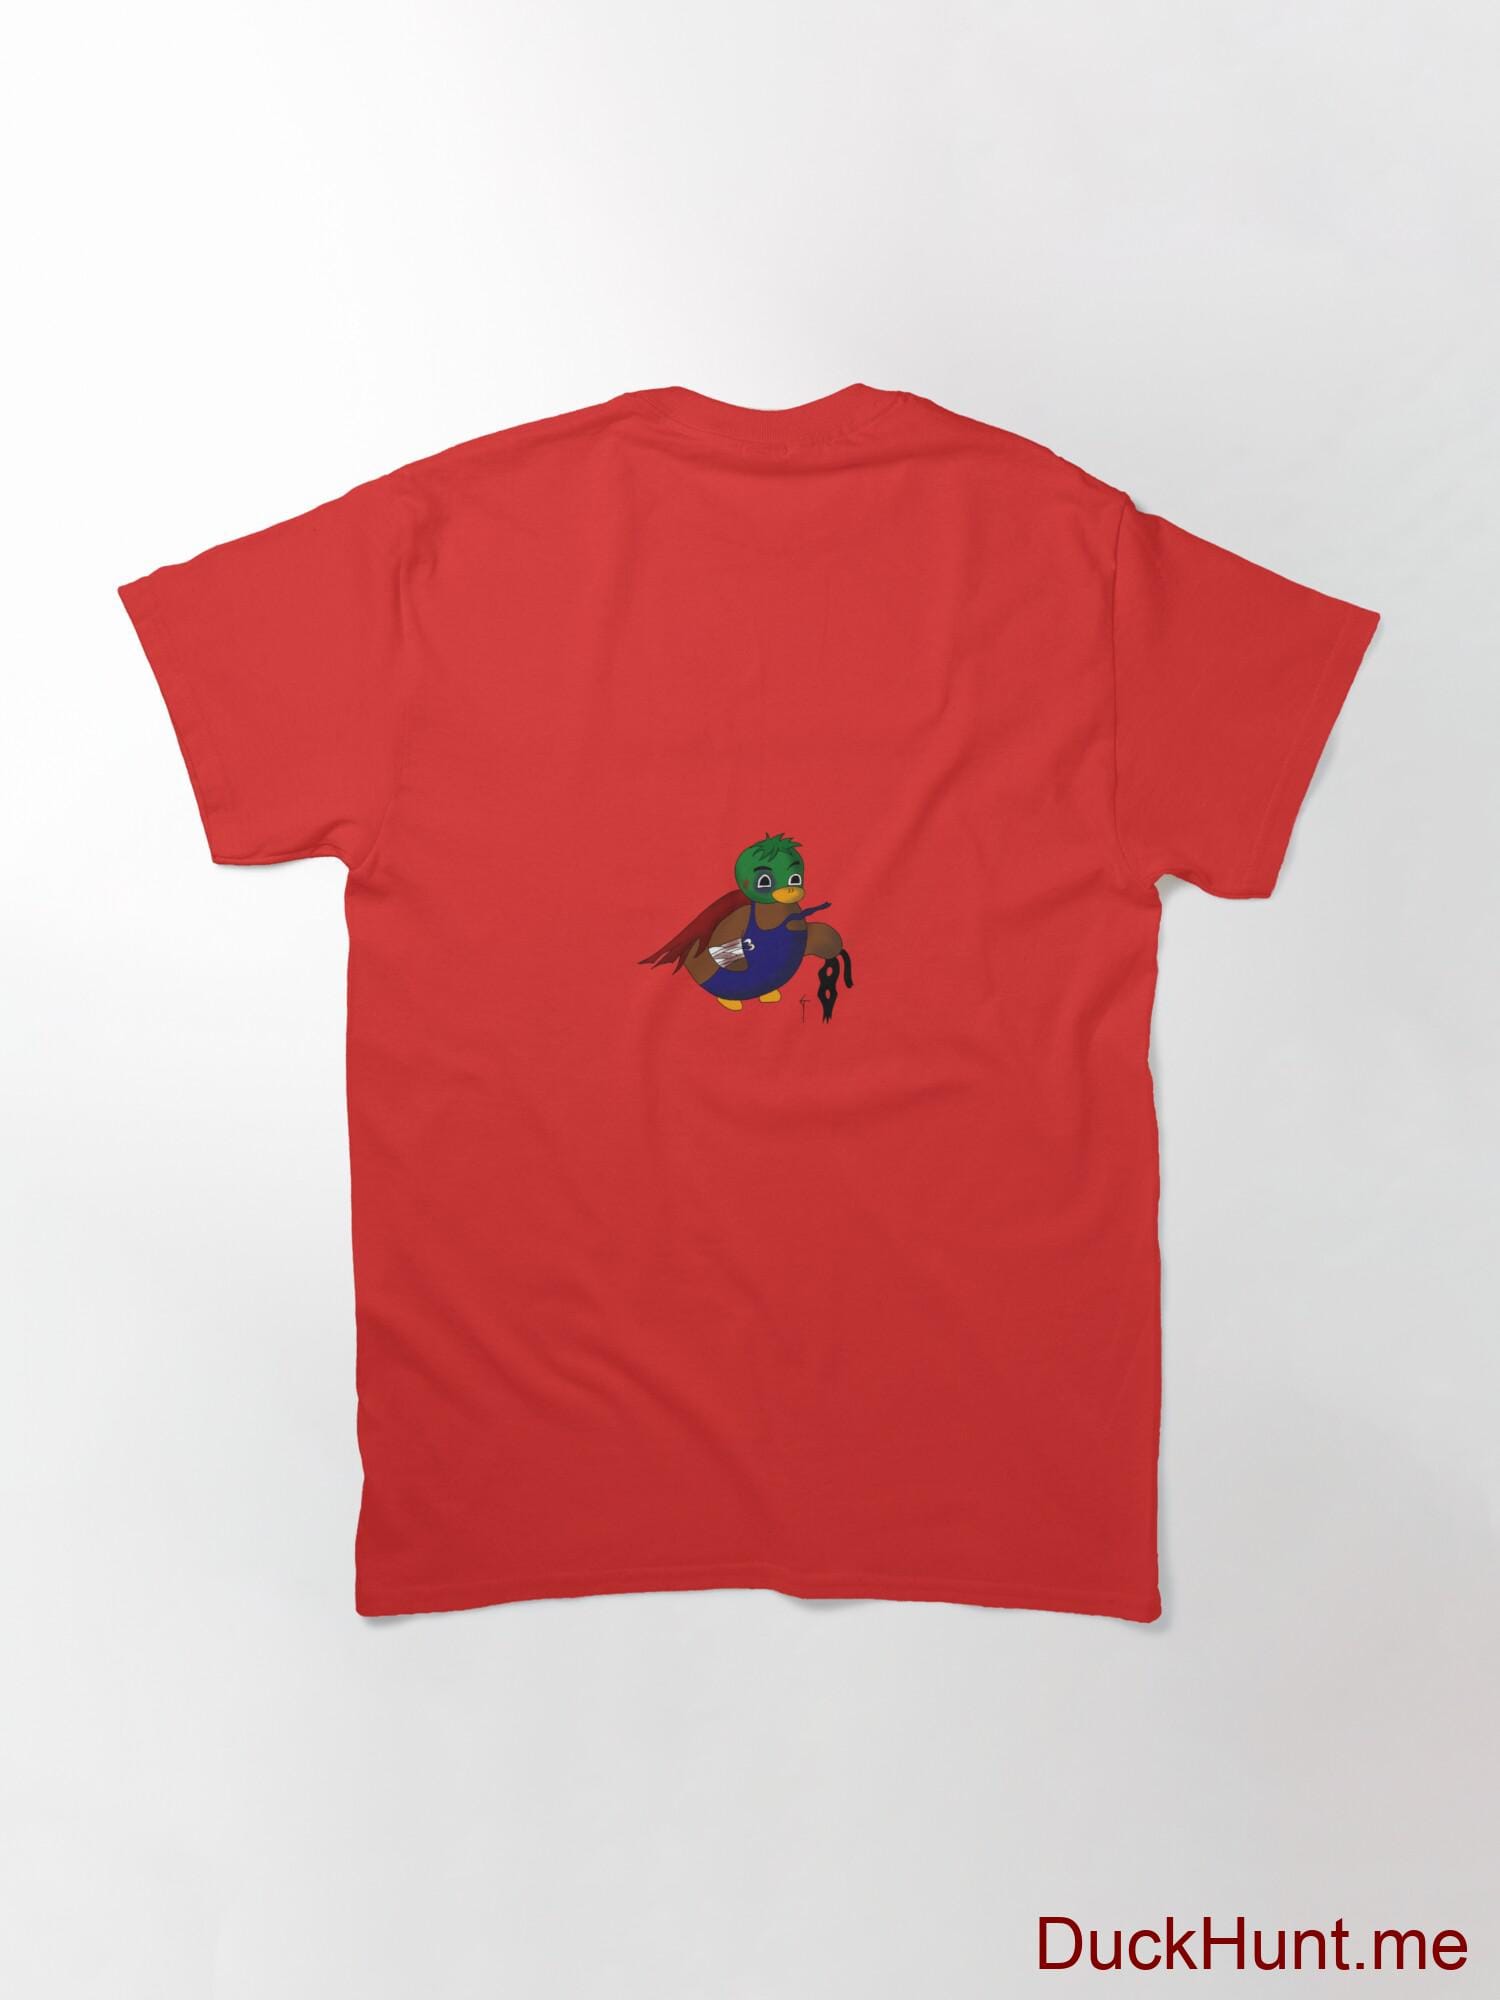 Dead DuckHunt Boss (smokeless) Red Classic T-Shirt (Back printed) alternative image 1